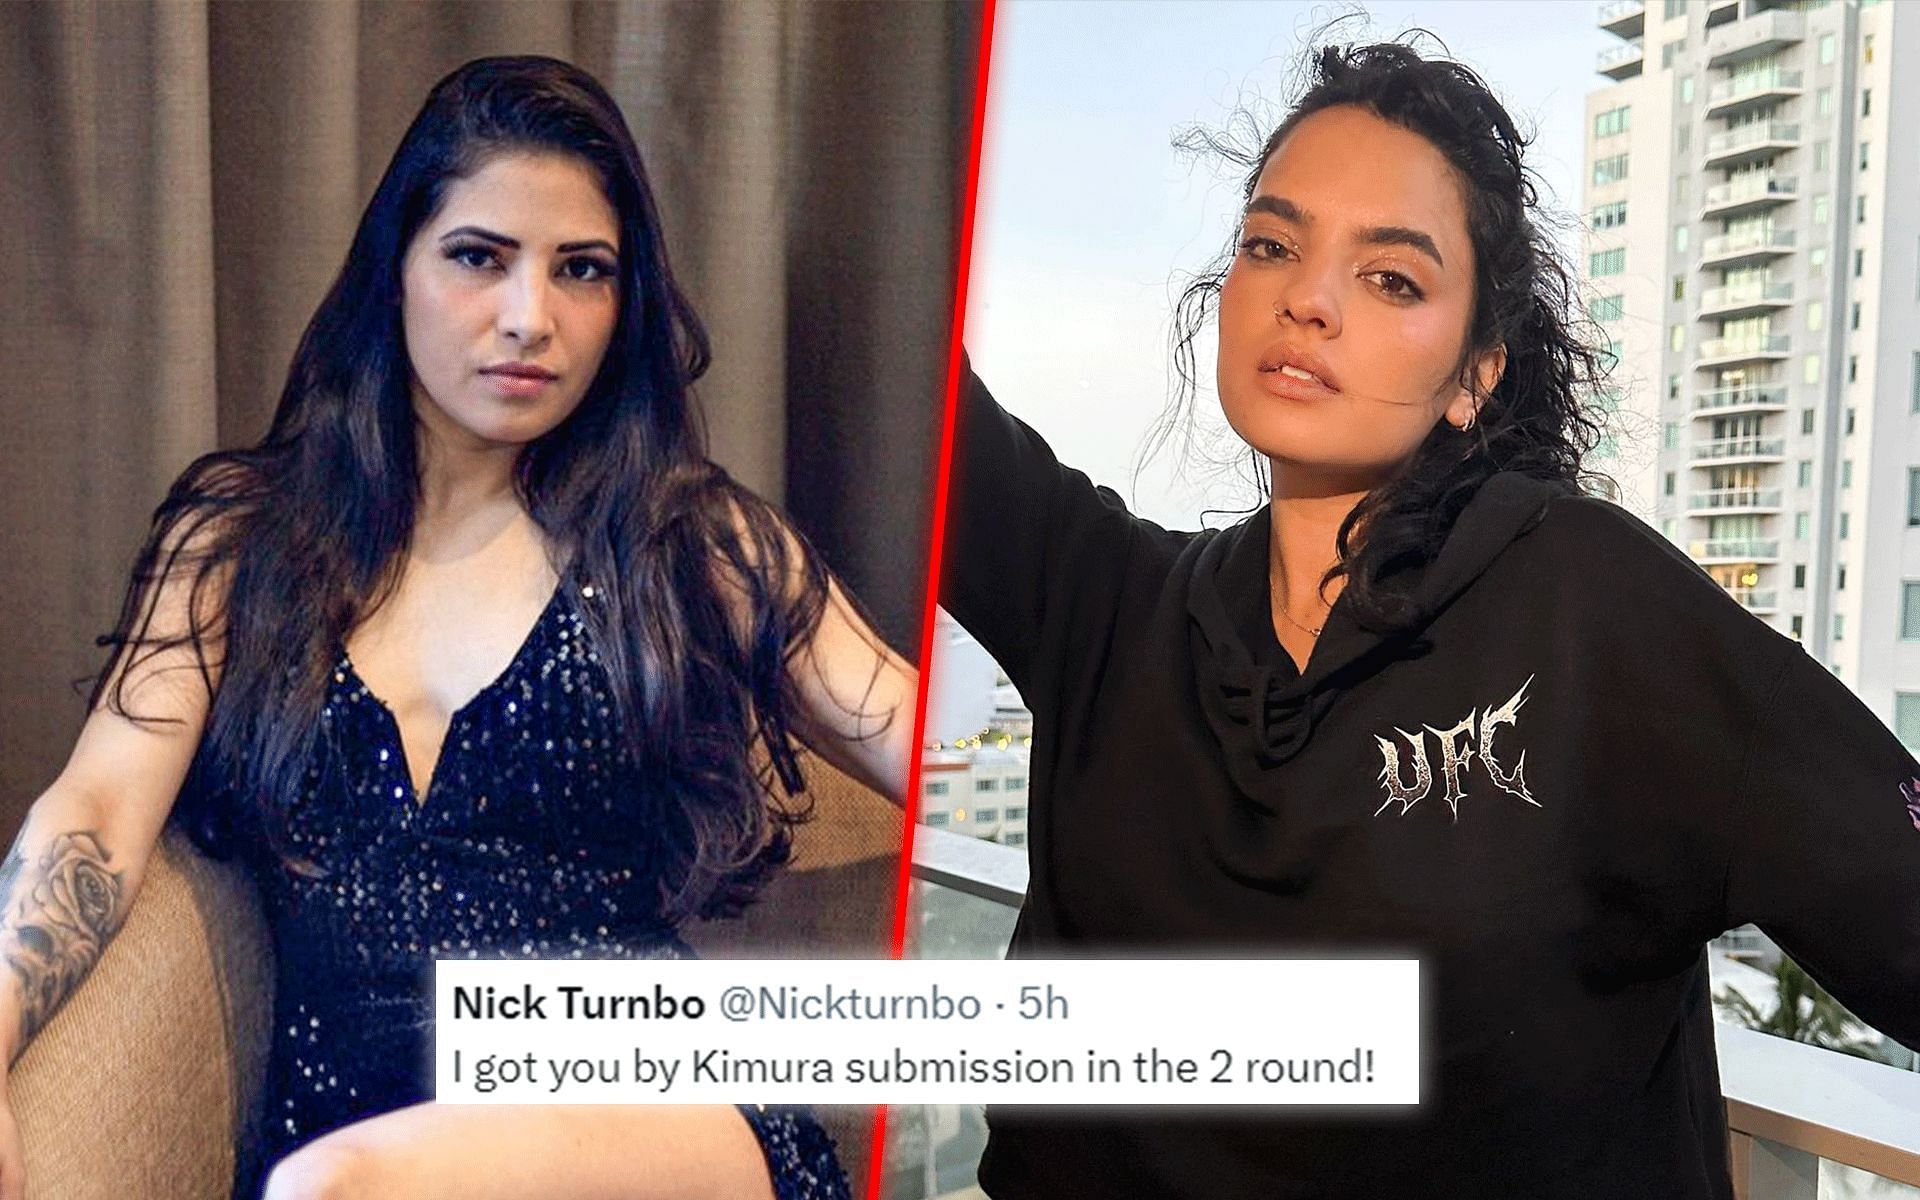 Fans react to Nina-Marie Daniele (right), who jokes about her fight with Polyana Viana (left) [Images courtesy: @ninamariedaniele and @polyanaviana on Instagram]